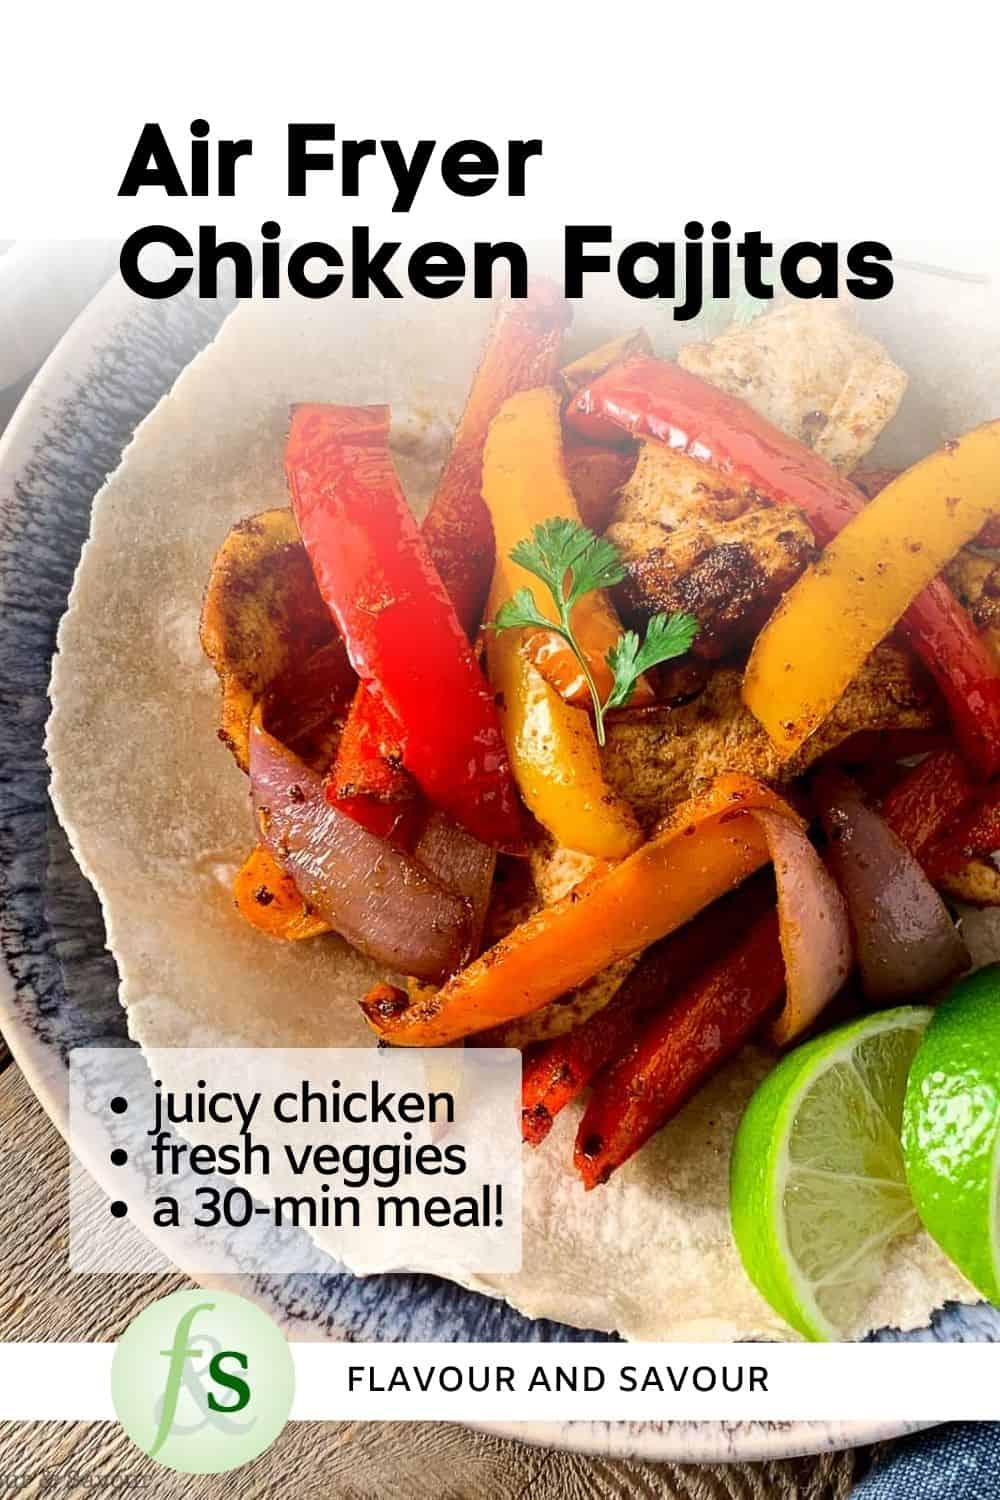 Image with text for air fryer chicken fajitas.